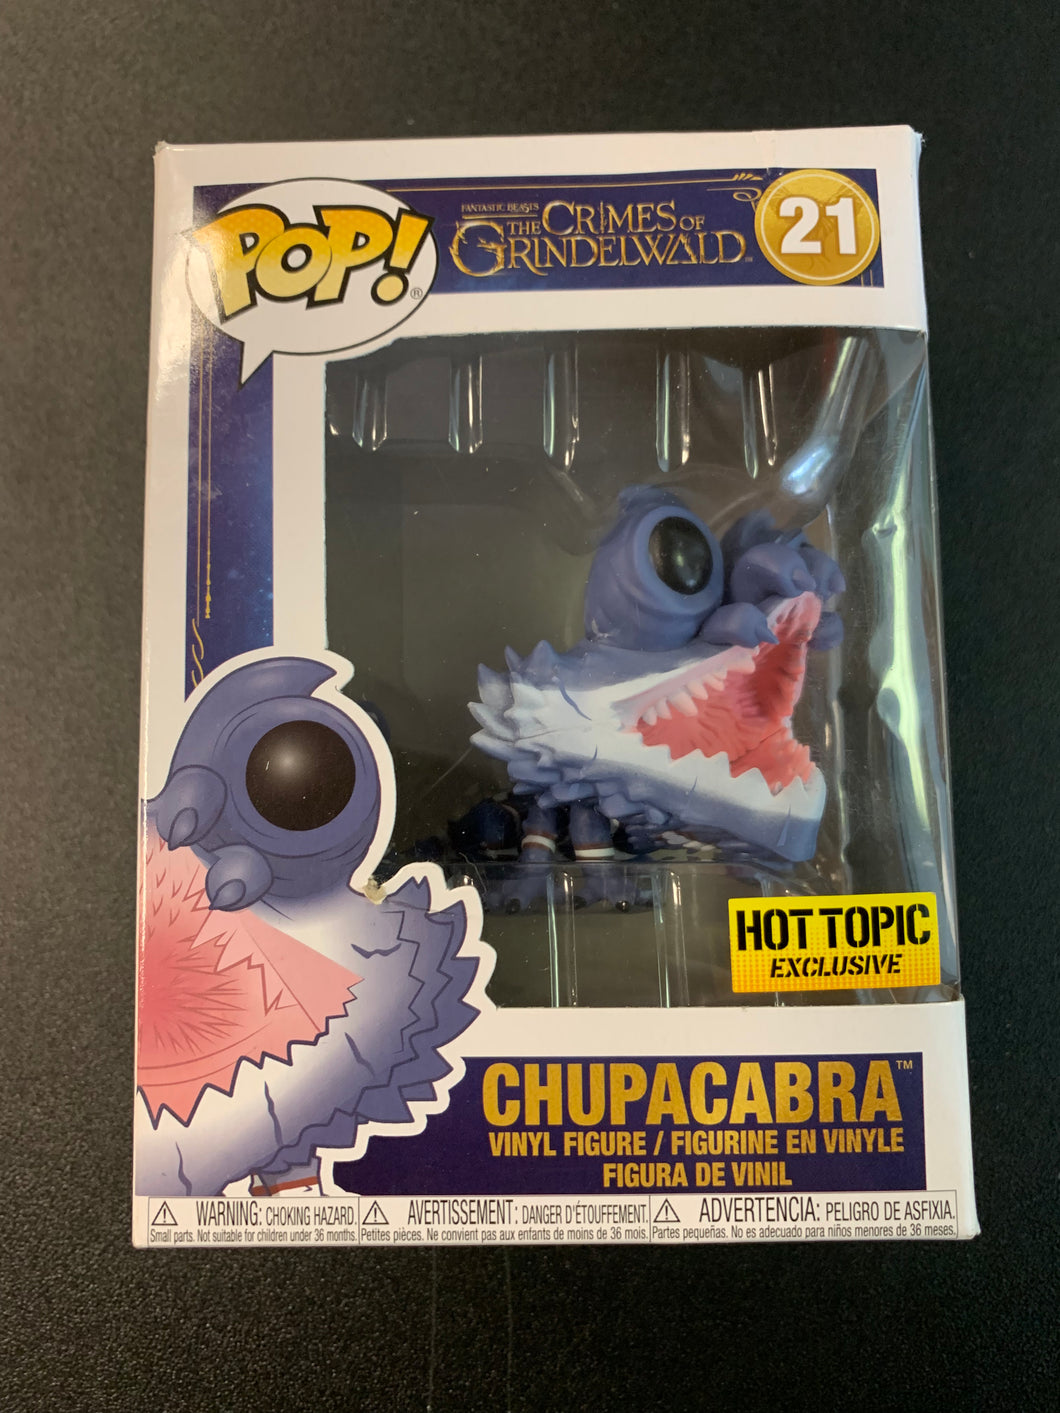 FUNKO POP FANTASTIC BEASTS THE CRIMES OF GRINDELWALD CHUPACABRA HOT TOPIC EXCLUSIVE 21